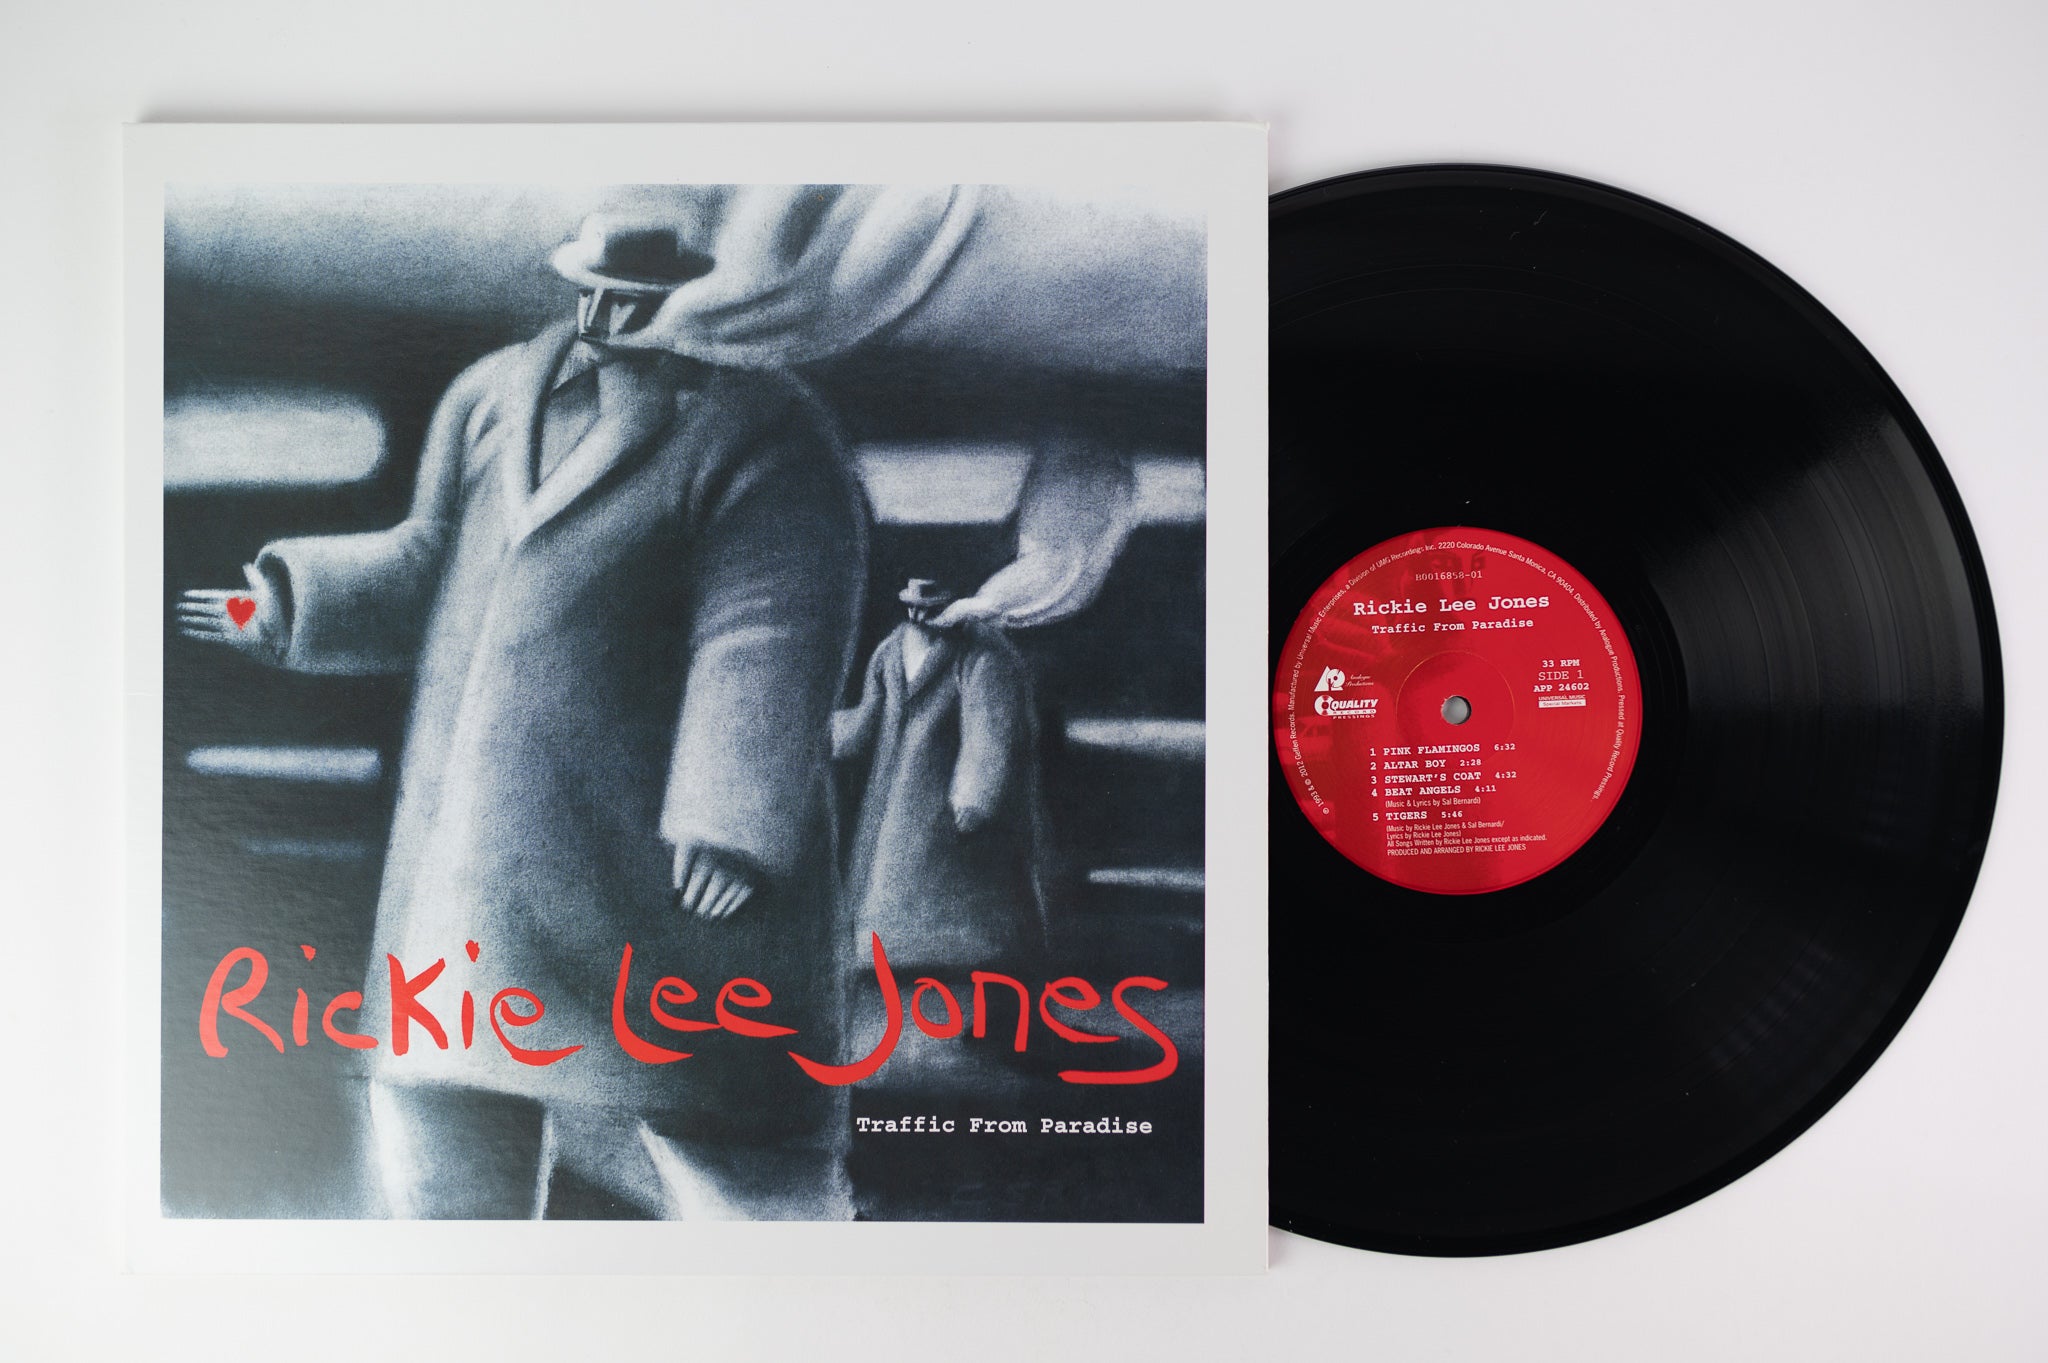 Rickie Lee Jones - Traffic From Paradise on Analogue Productions